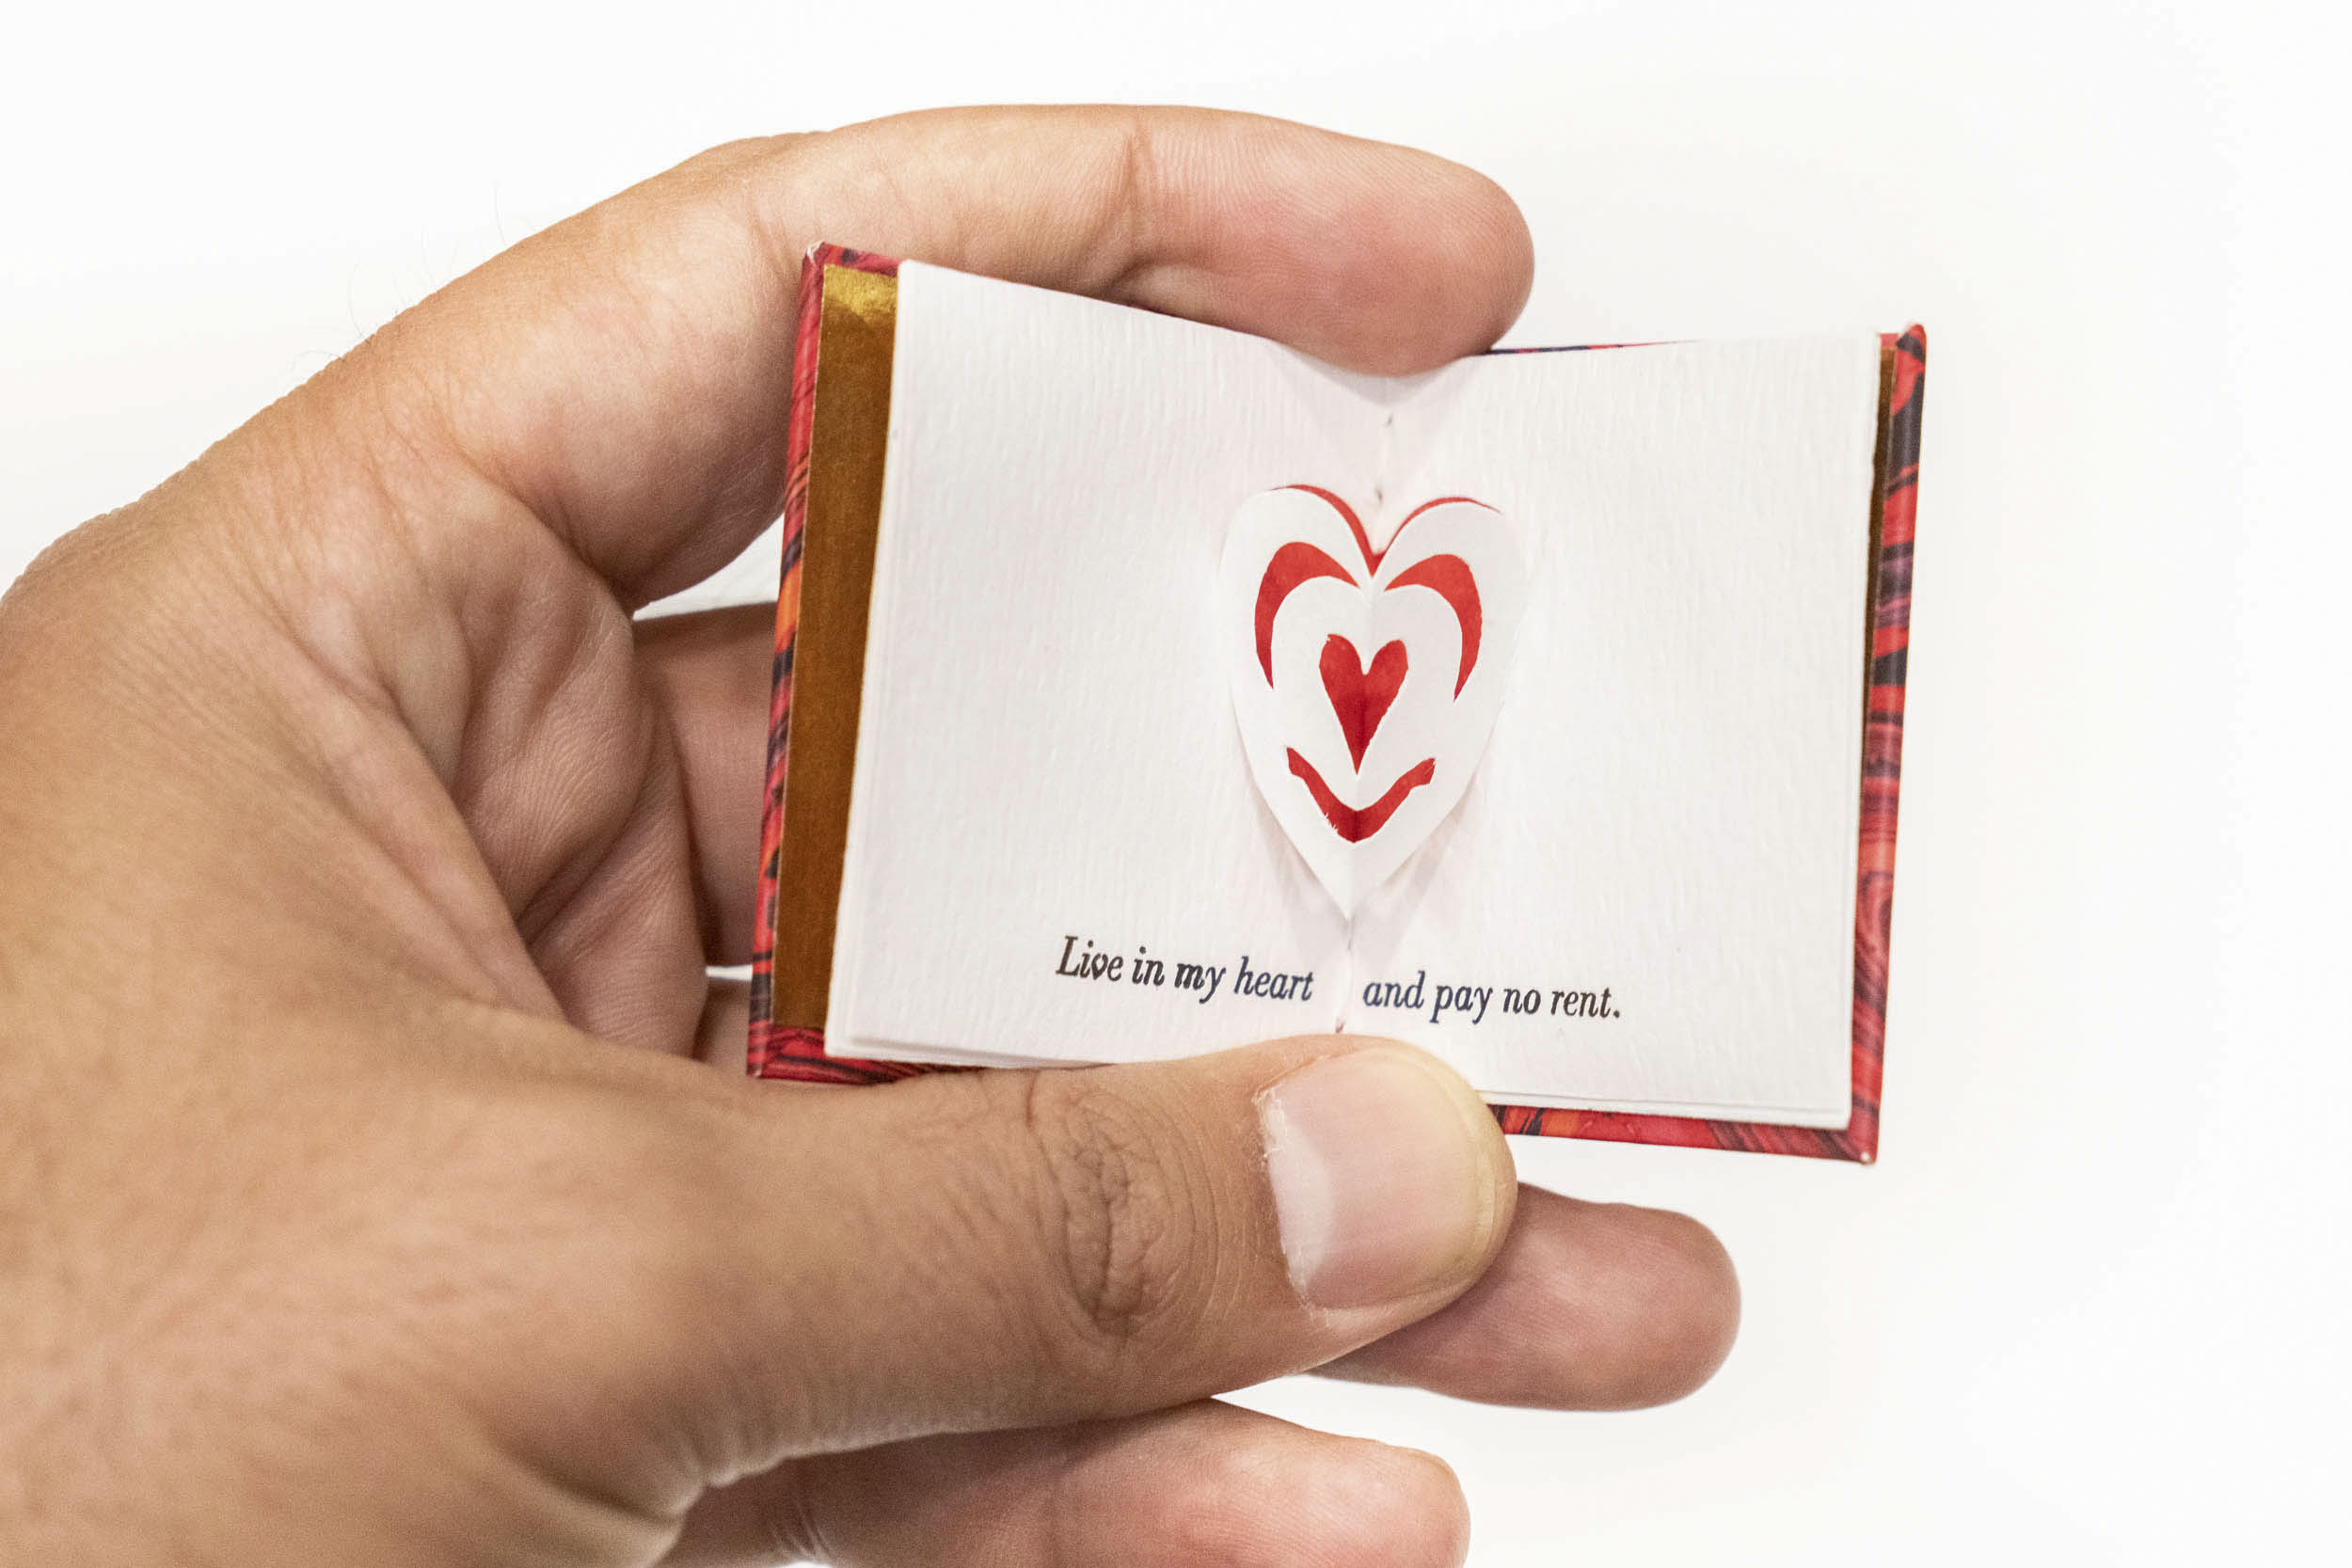 This miniature book, titled “A Valentine,” was made by Jeanne Goessling and is part of the library’s McGehee Miniature Book Collection